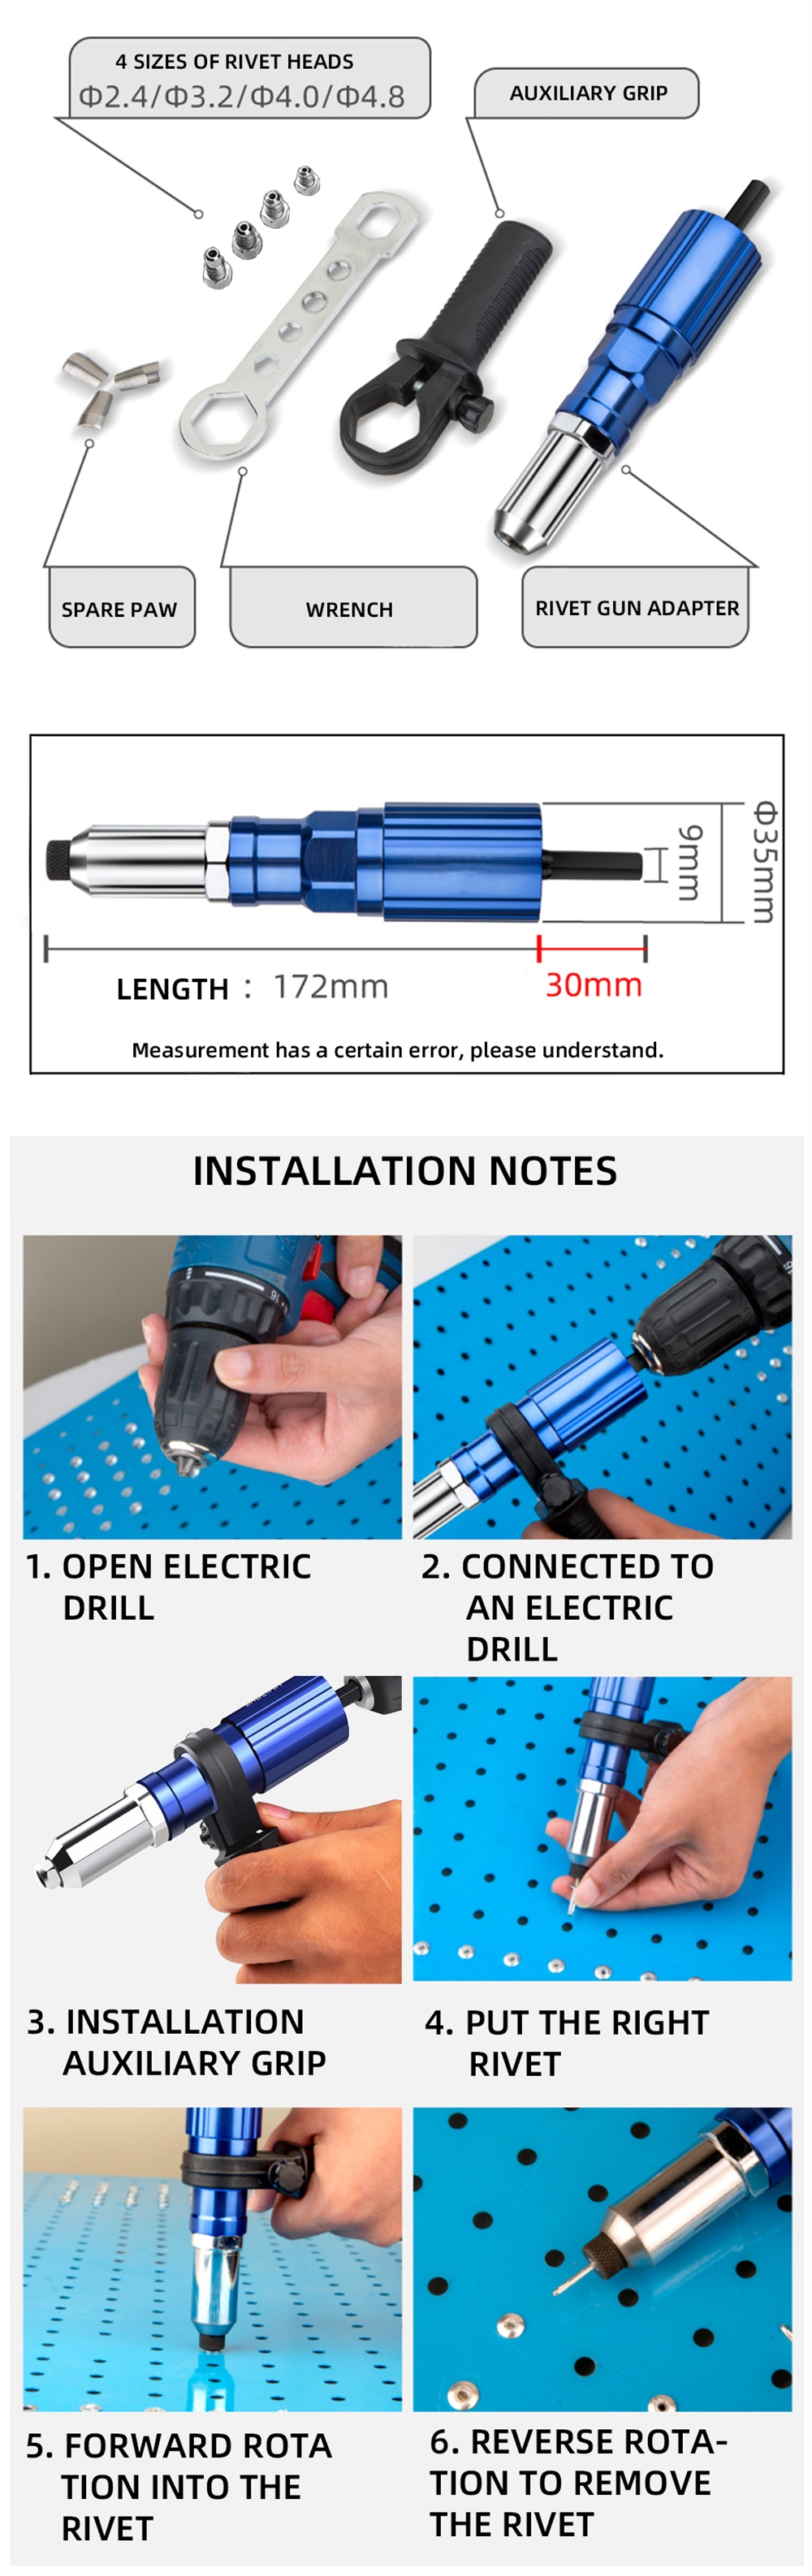 Drillpro-Upgrade-Electric-Rivet-Nut-Attachment-Cordless-Riveting-Drill-Adapter-Riveting-Tool-1754704-3